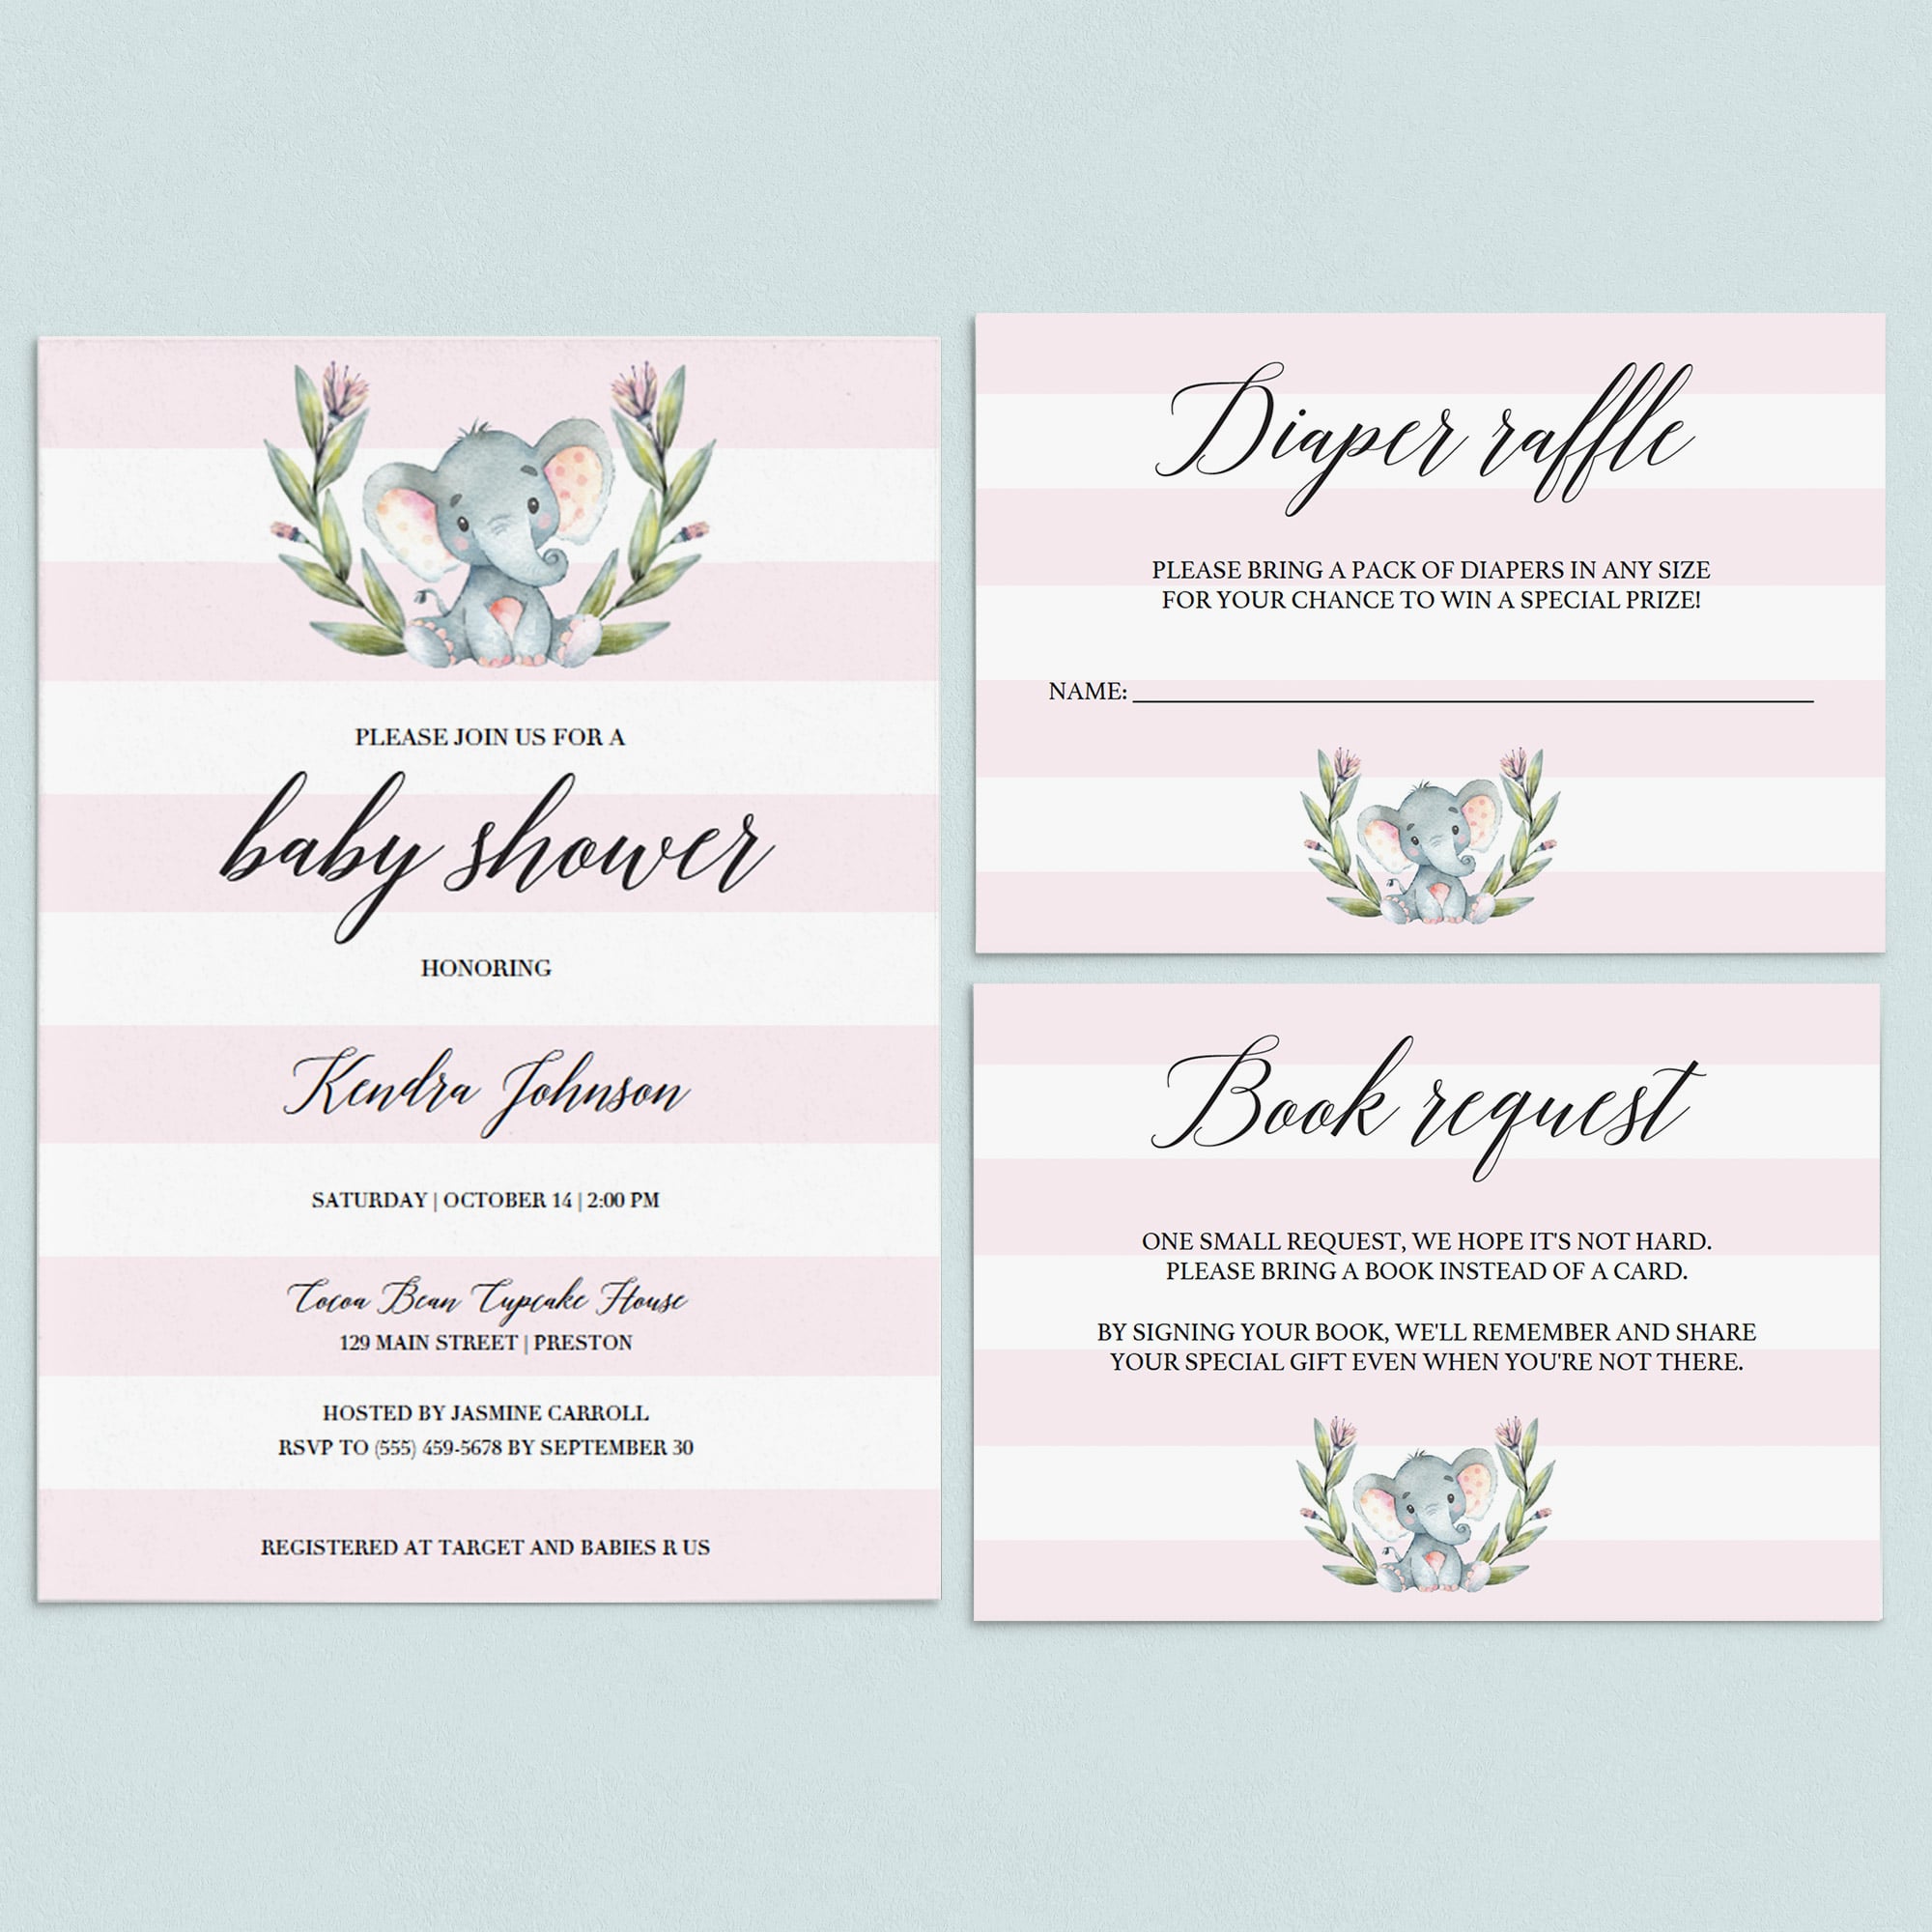 Pink Elephant baby shower invitation templates by LittleSizzle